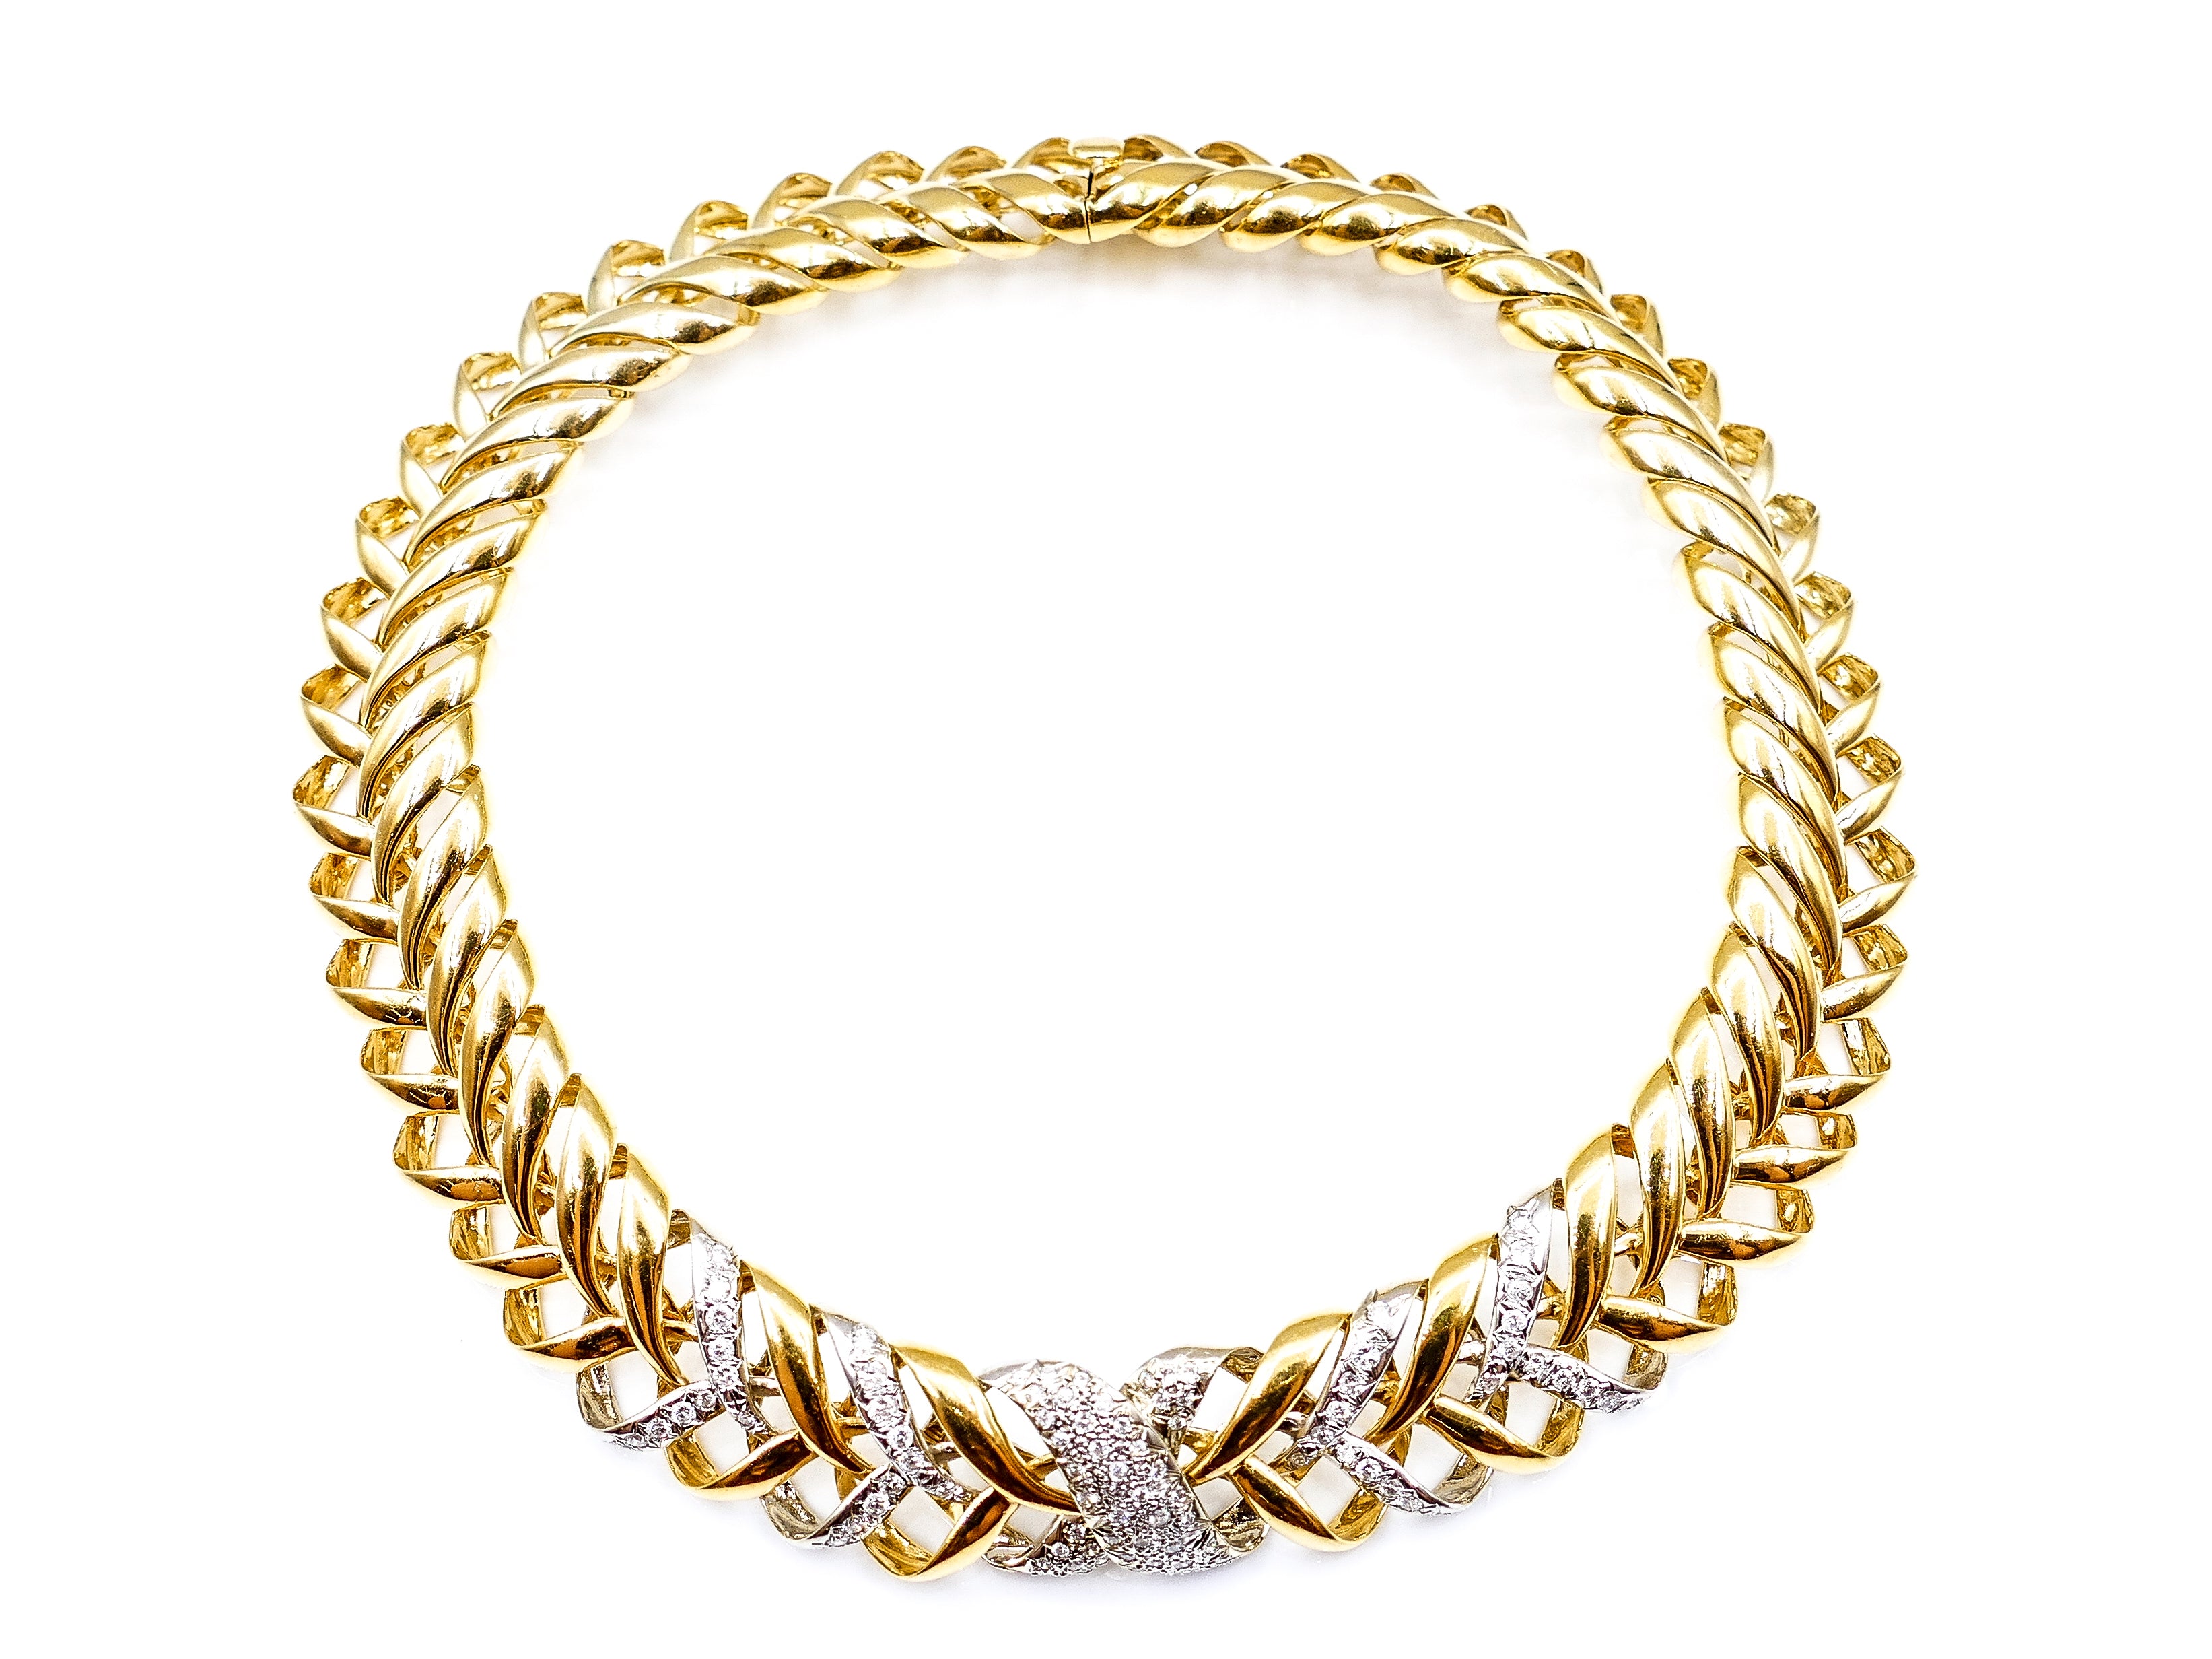 Italian Open Lace 18k Gold and Diamond Collar Necklace